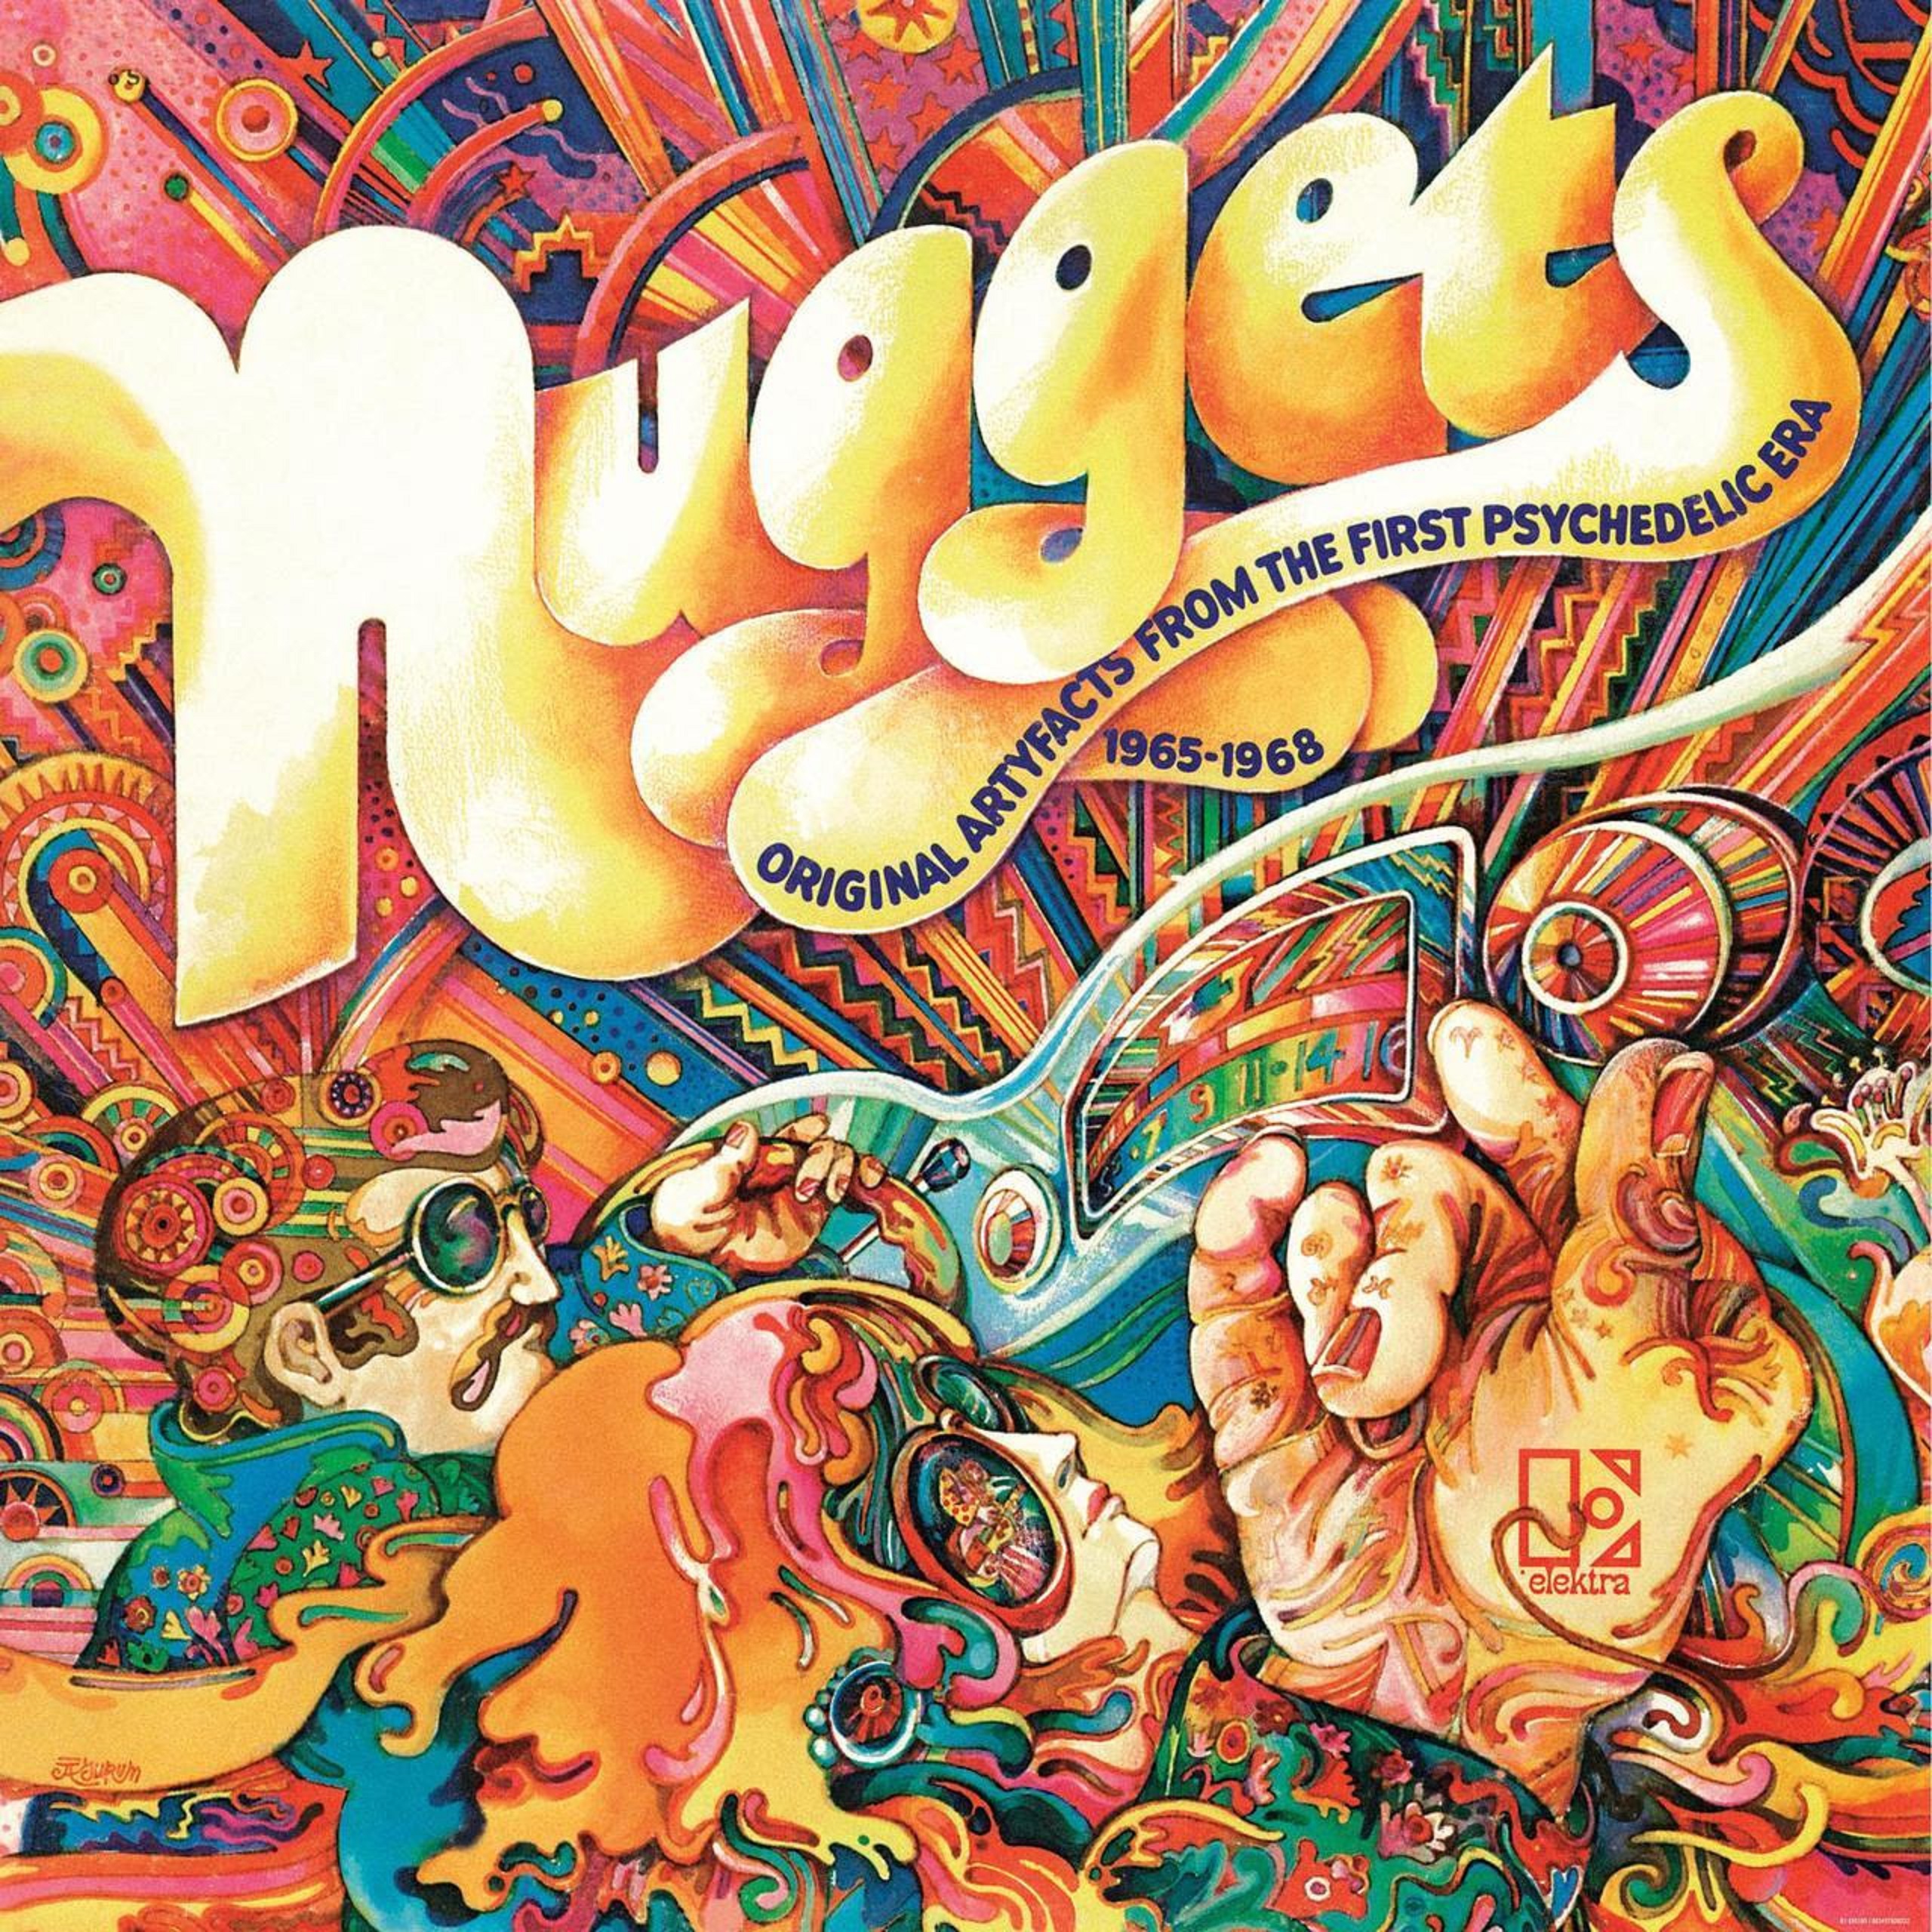 WILD HONEY FOUNDATION, LENNY KAYE  AND RHINO RECORDS PRESENT  NUGGETS:  ORIGINAL ARTYFACTS FROM THE FIRST PSYCHEDELIC ERA, 1965–1968: A 50th ANNIVERSARY CELEBRATION